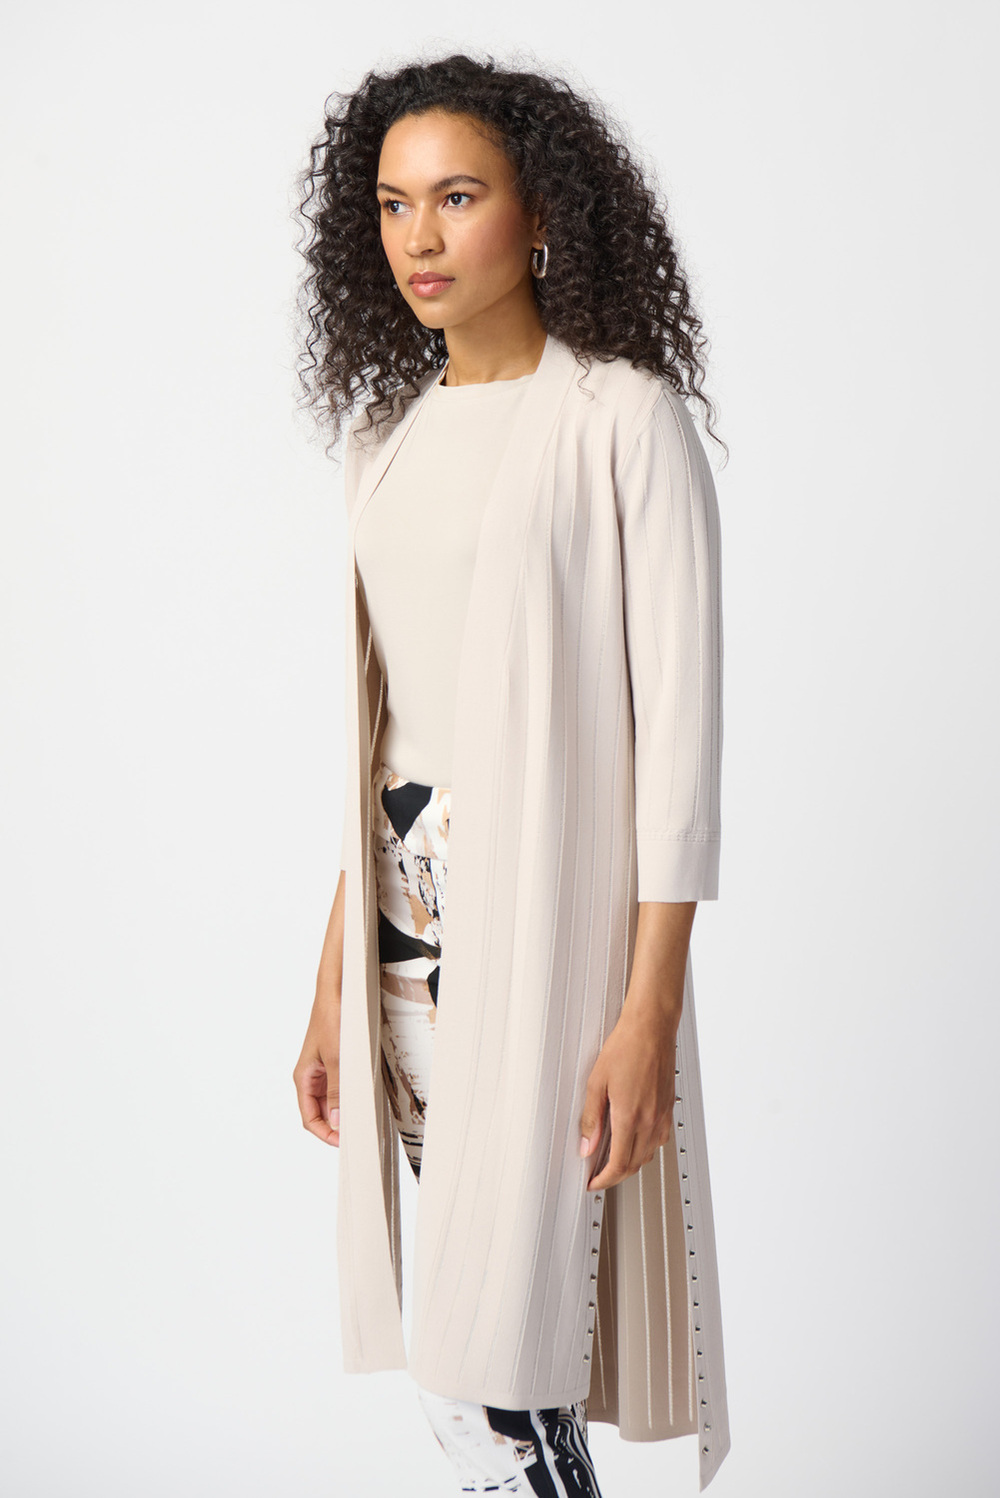 Rib Knit Cover-Up Style 222929. Moonstone